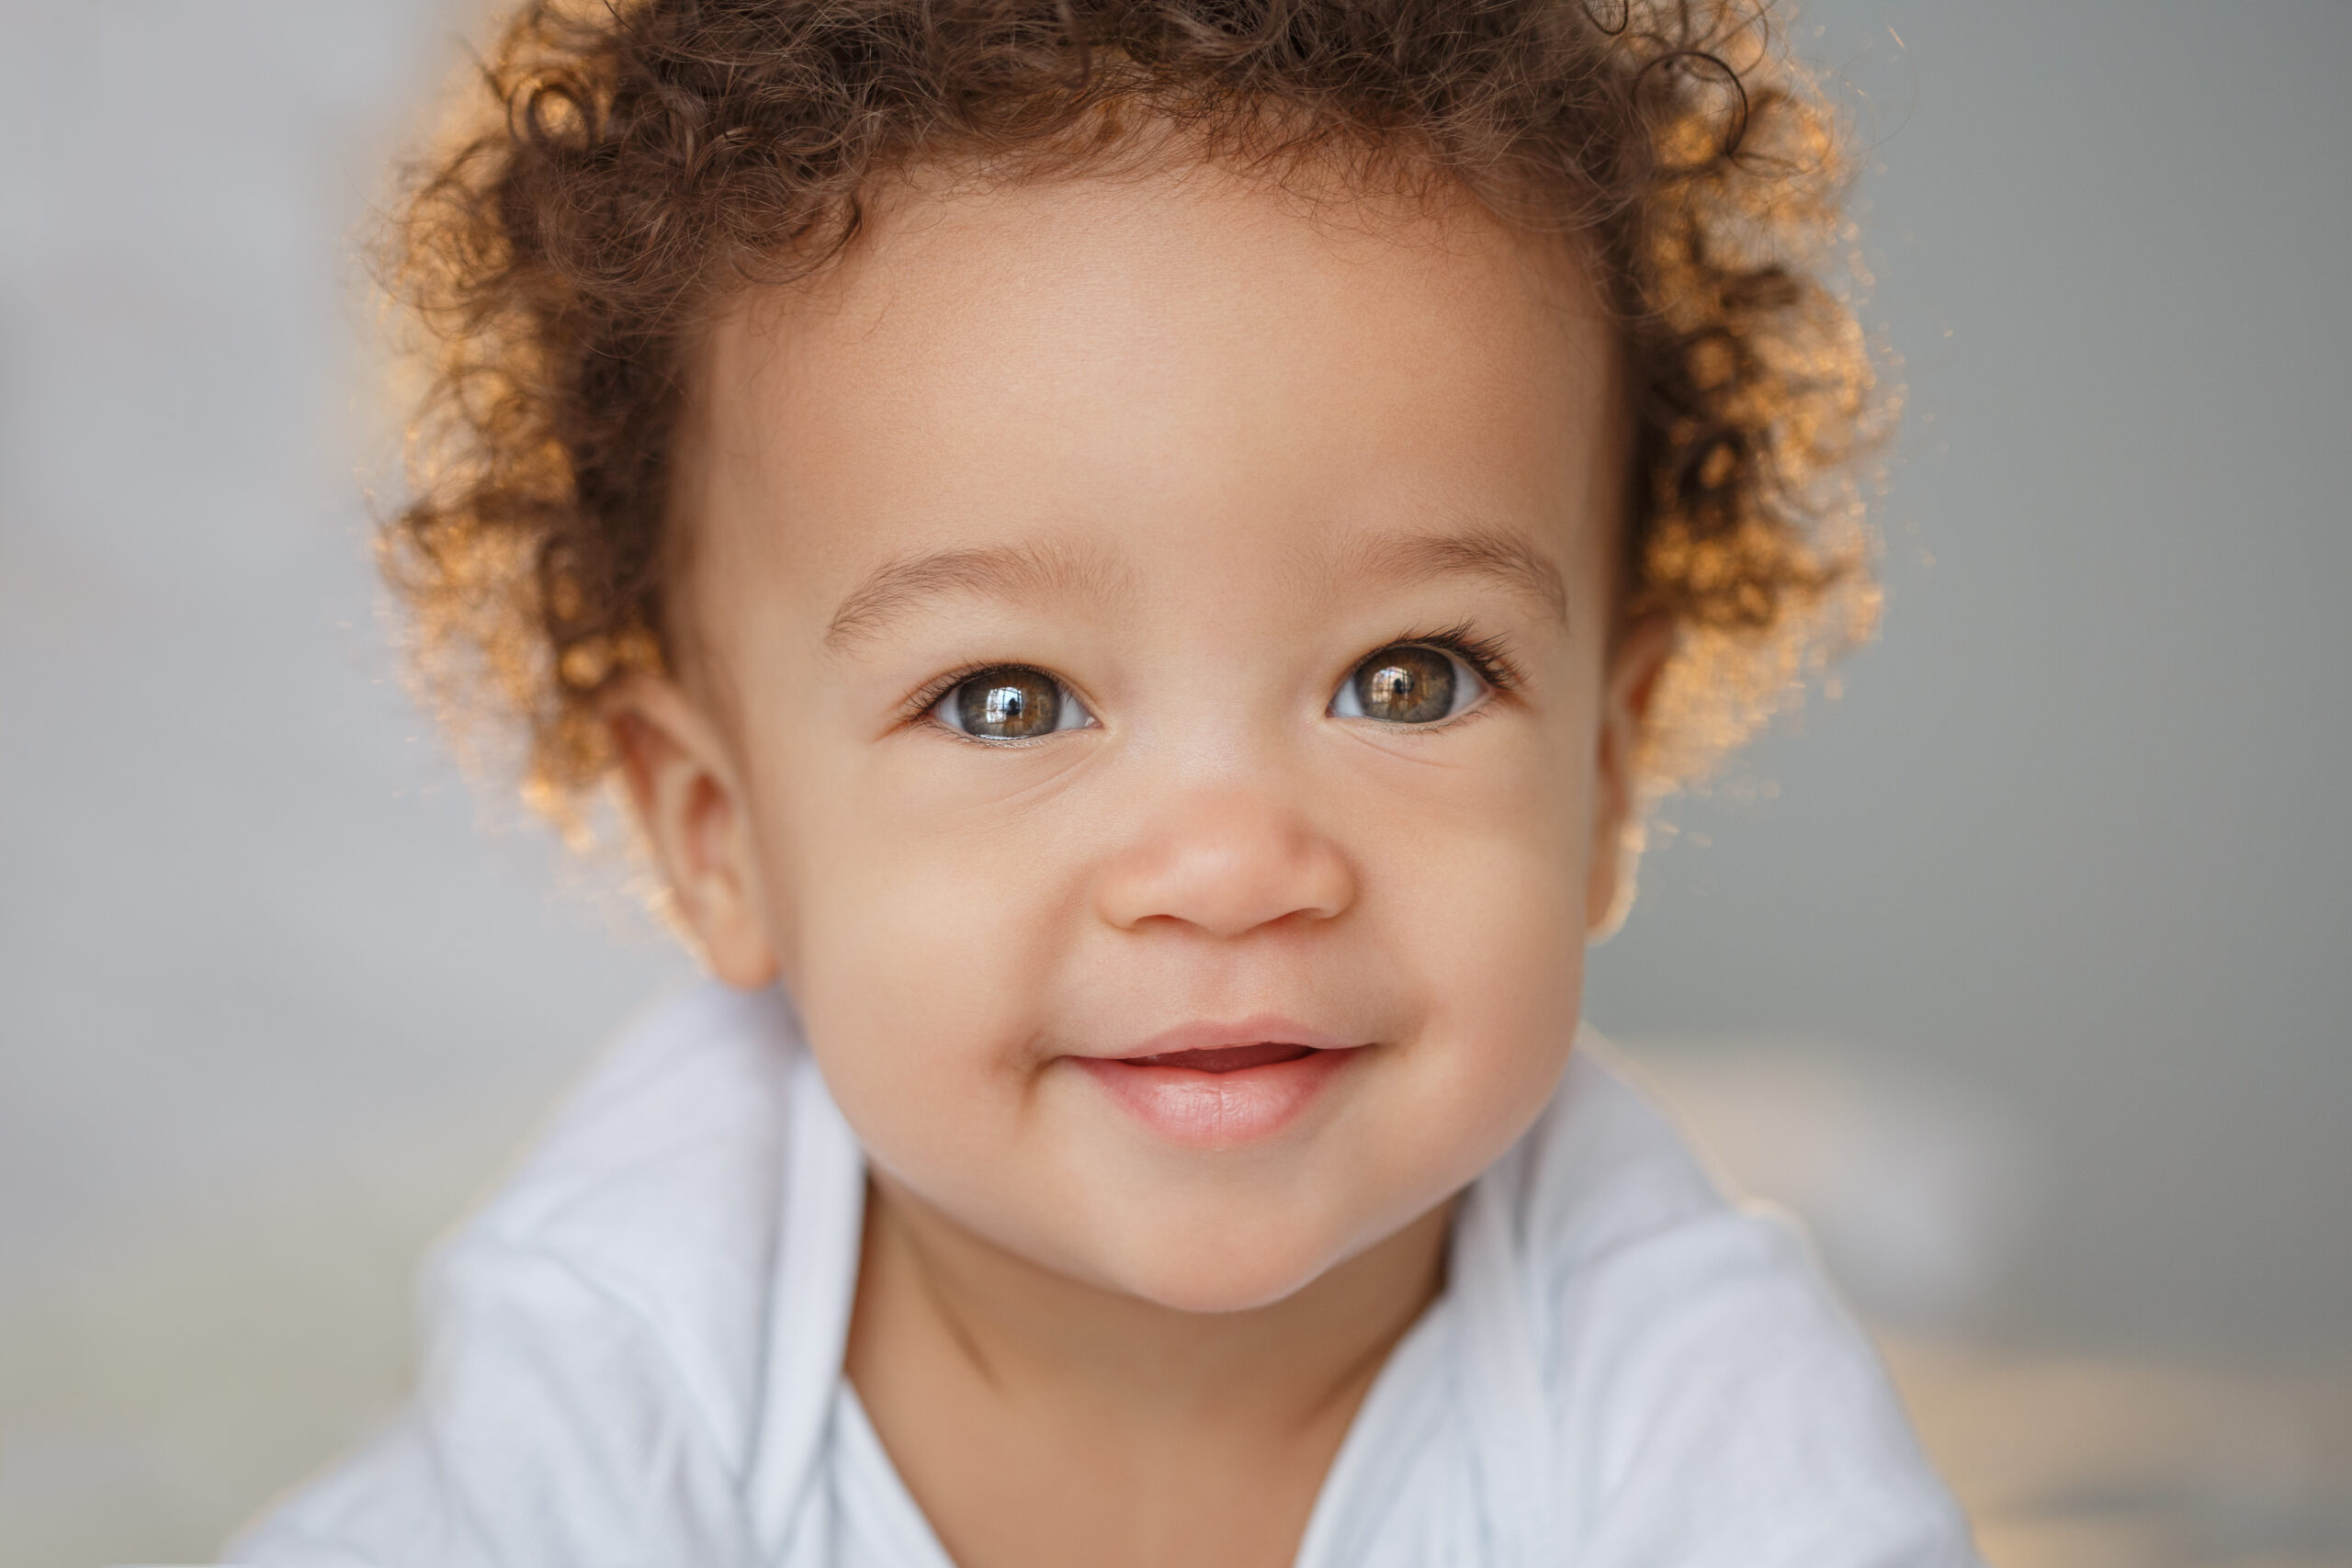 Can My Child Benefit from Lip-Tie or Tongue-Tie Laser Surgery?